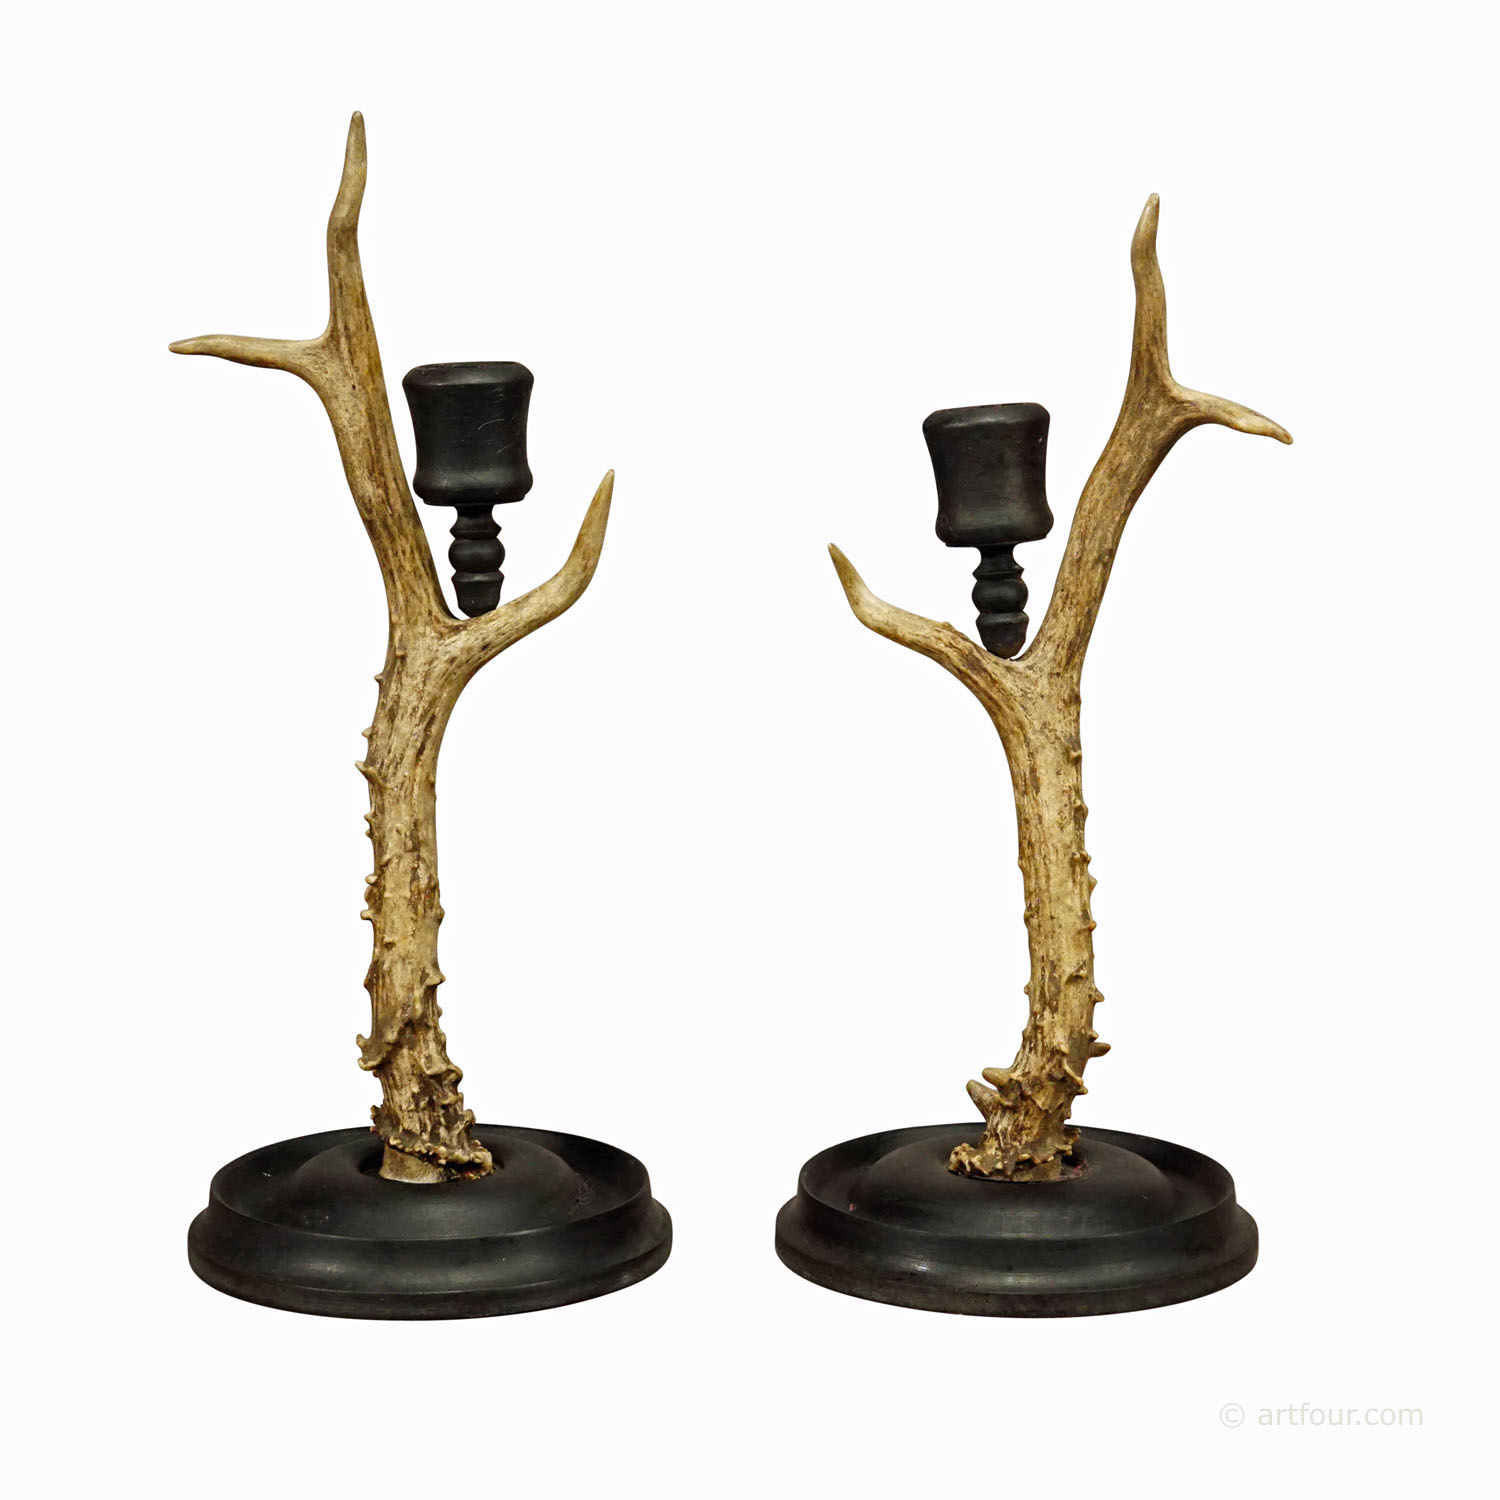 A Pair Vintage Black Forest Candle Holders with Wooden Base and Spout, Germany ca. 1930s